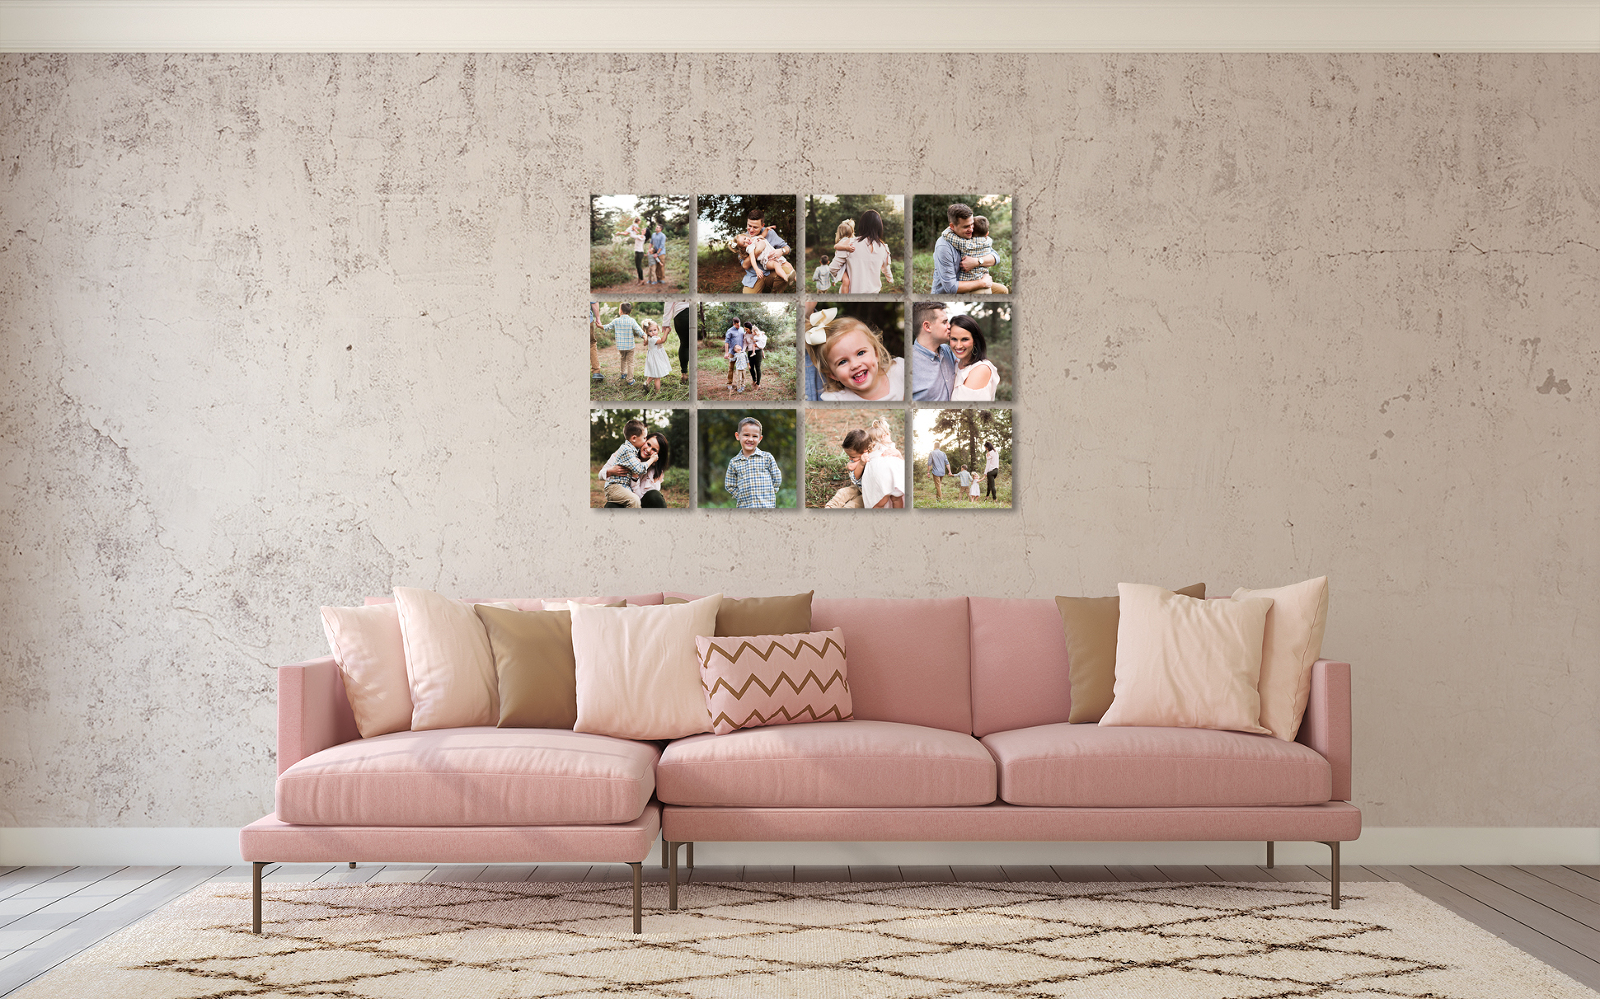 Photo collage displayed in living room over couch, wall art inspiration